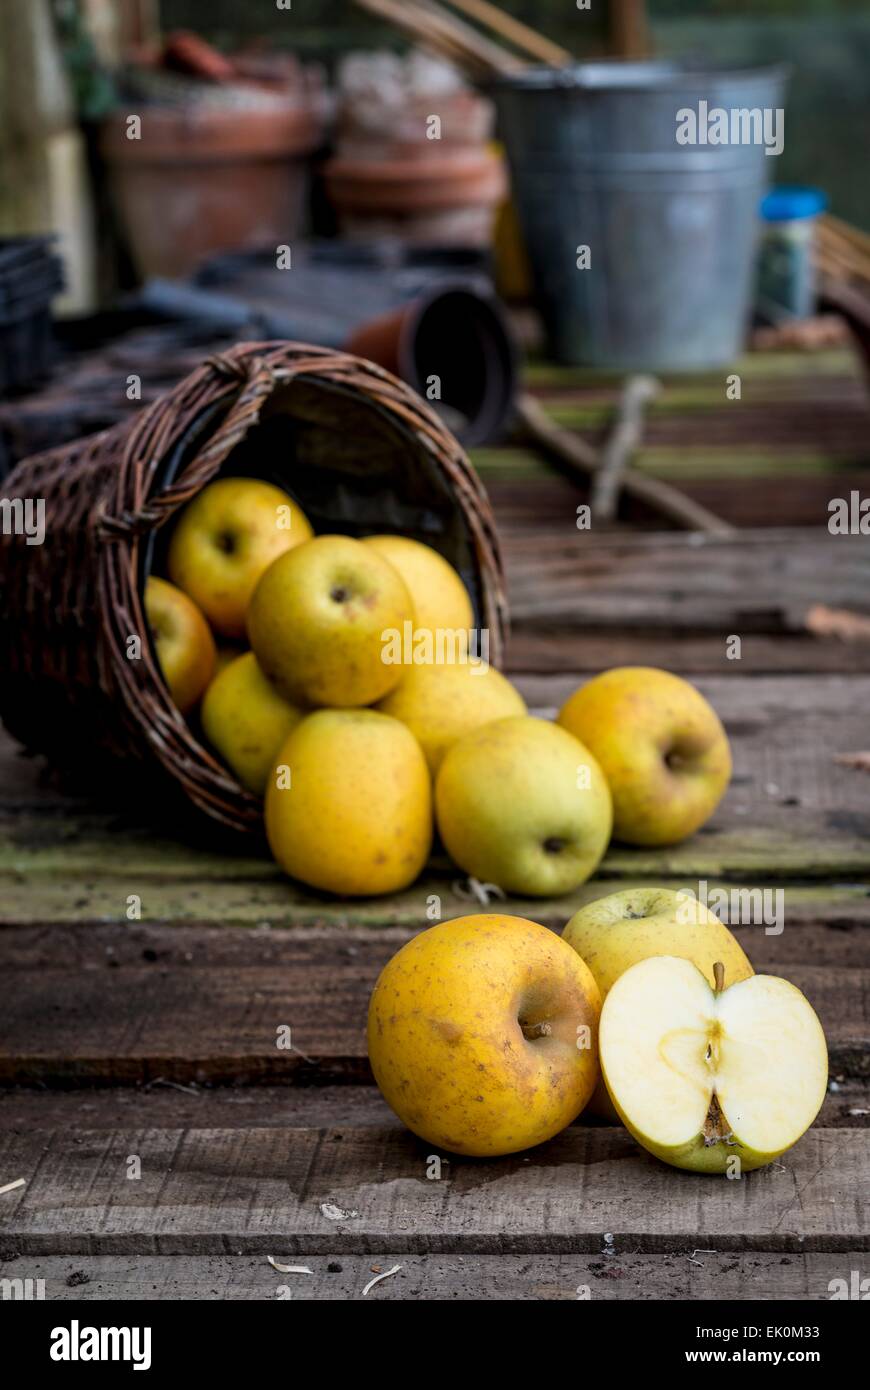 nobody, no one, no-one, healthy eating, fresh, food, food and drink, produce, fruit, still life, medium group of objects, apples, goldrush apples, basket, fallen Stock Photo